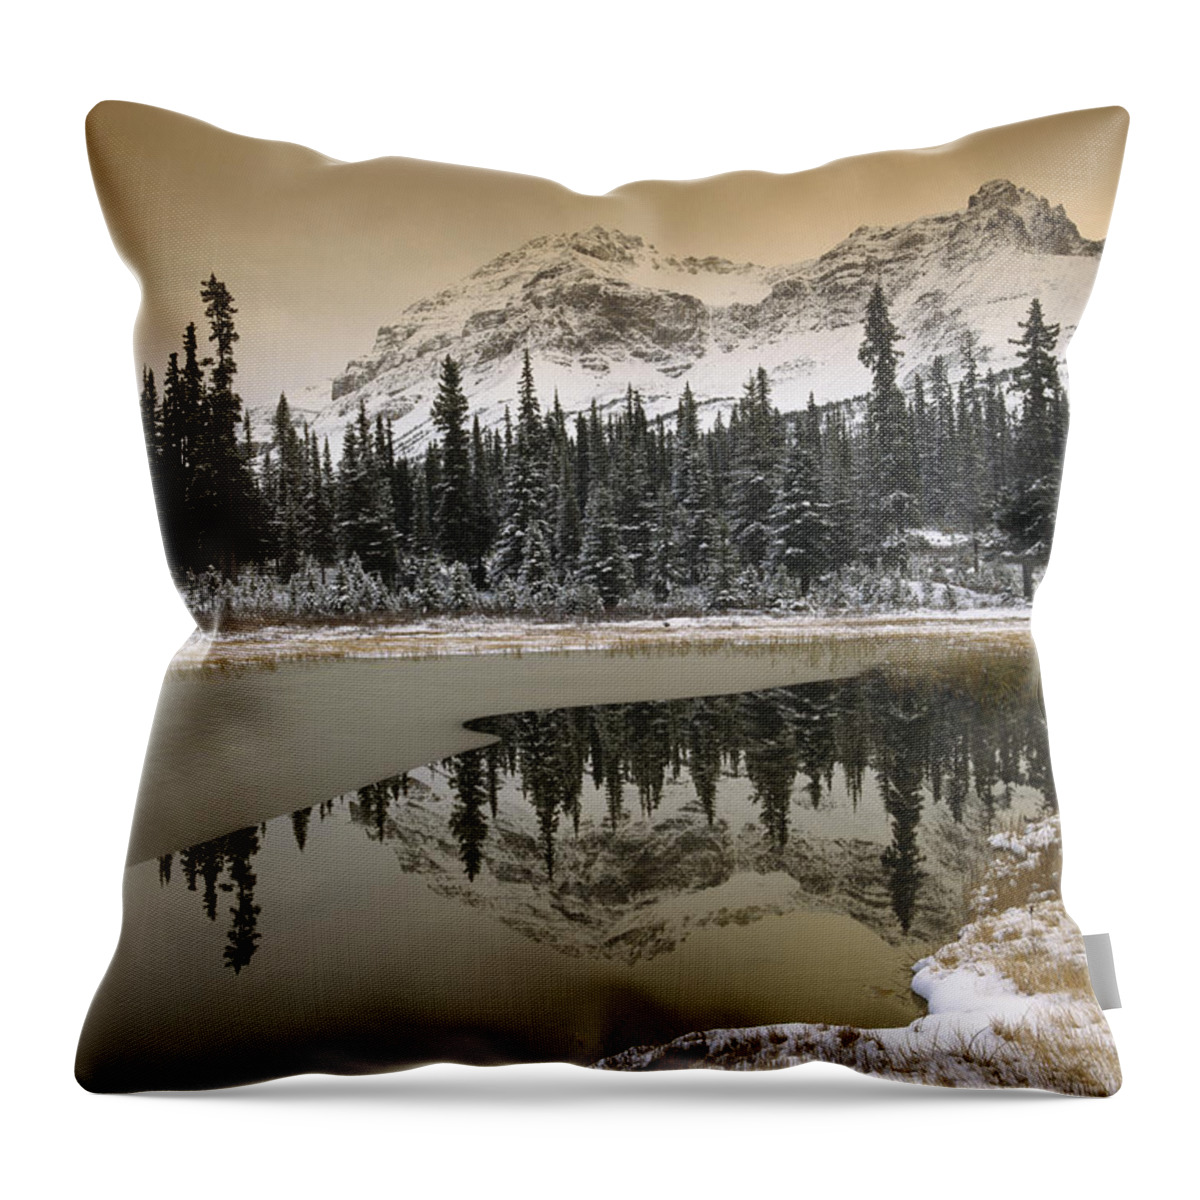 00170867 Throw Pillow featuring the photograph Canadian Rockies Dusted with Snow by Tim Fitzharris